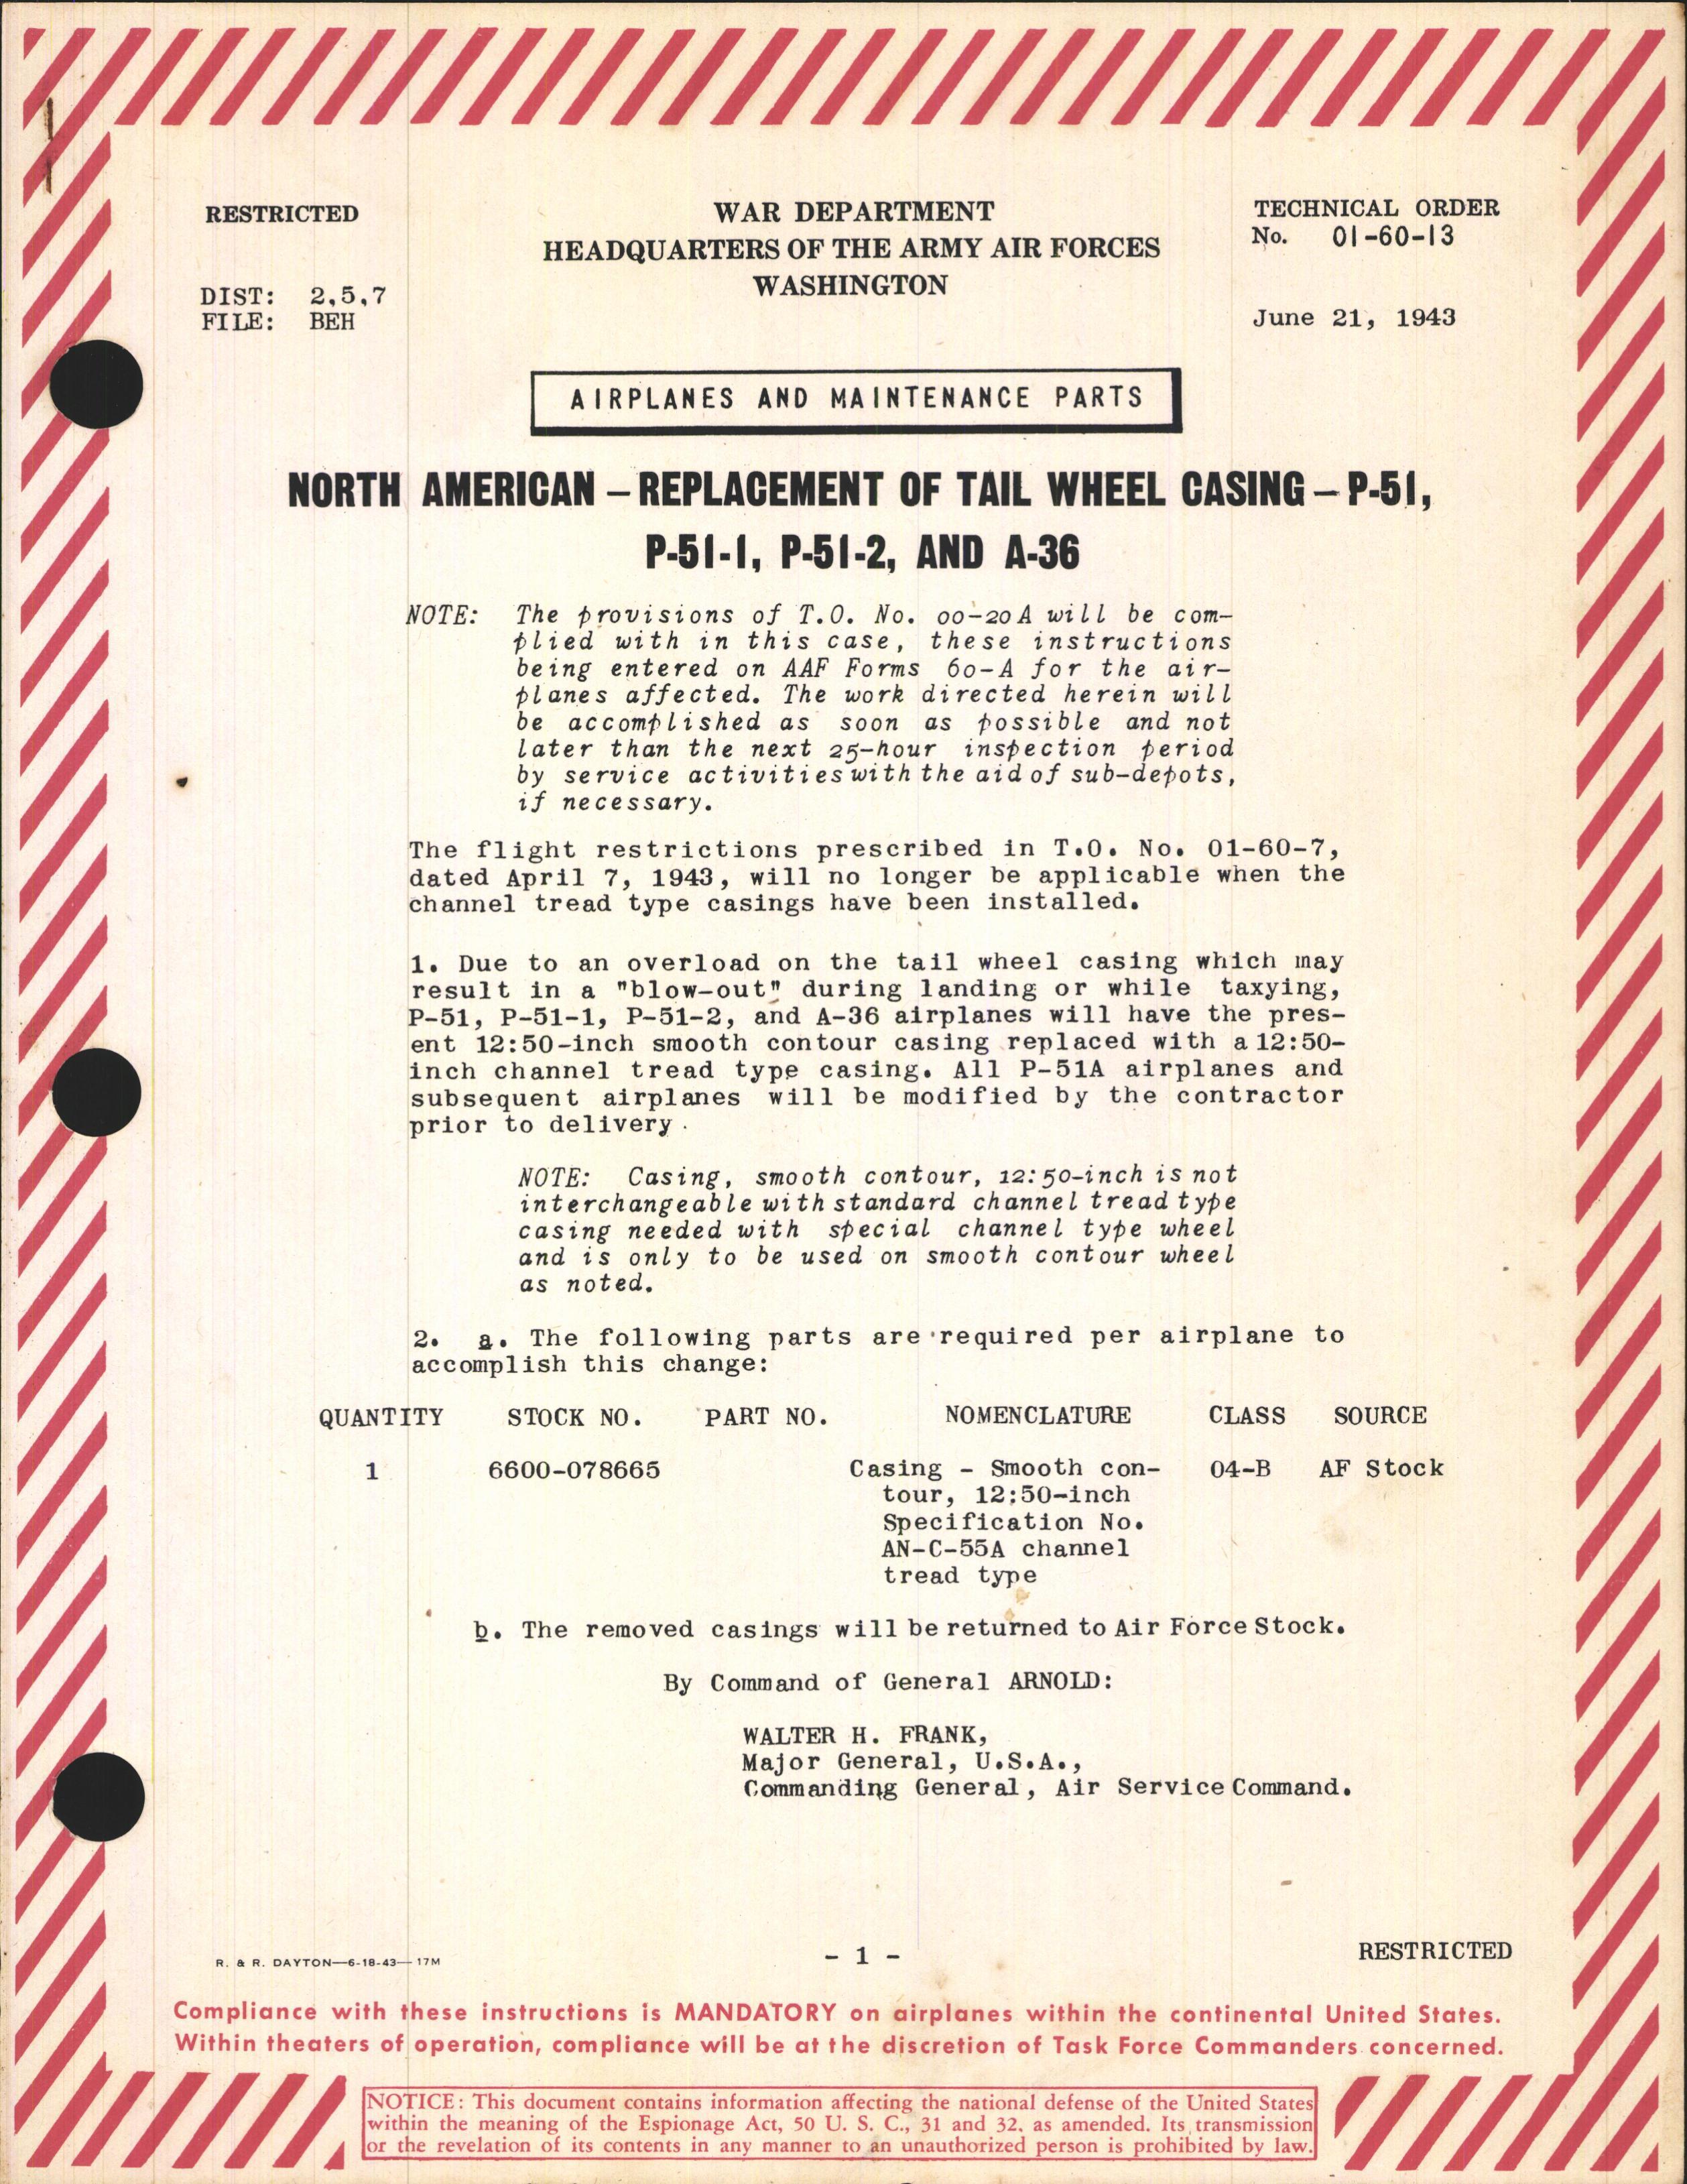 Sample page 1 from AirCorps Library document: Replacement of Tail Wheel Casing for P-51, P-51-1, P-51-2, and A-36